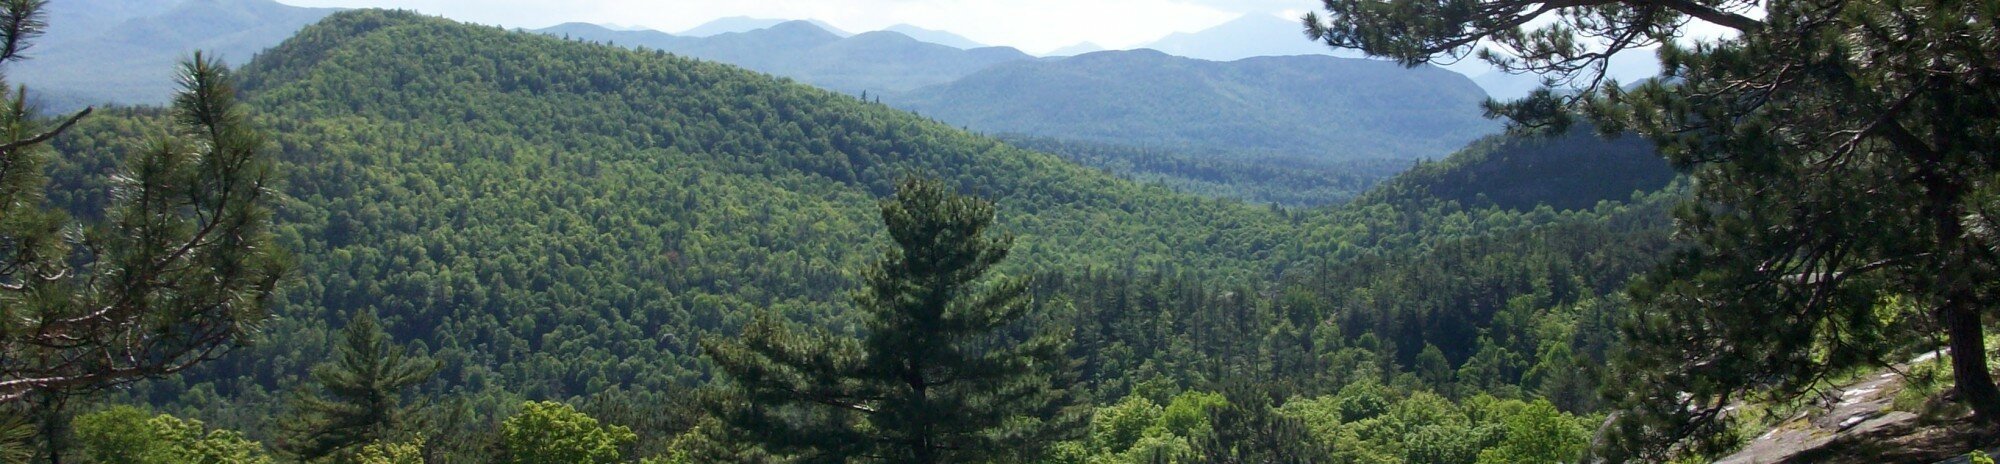 NYC Hiking Guide ADK Mountain View